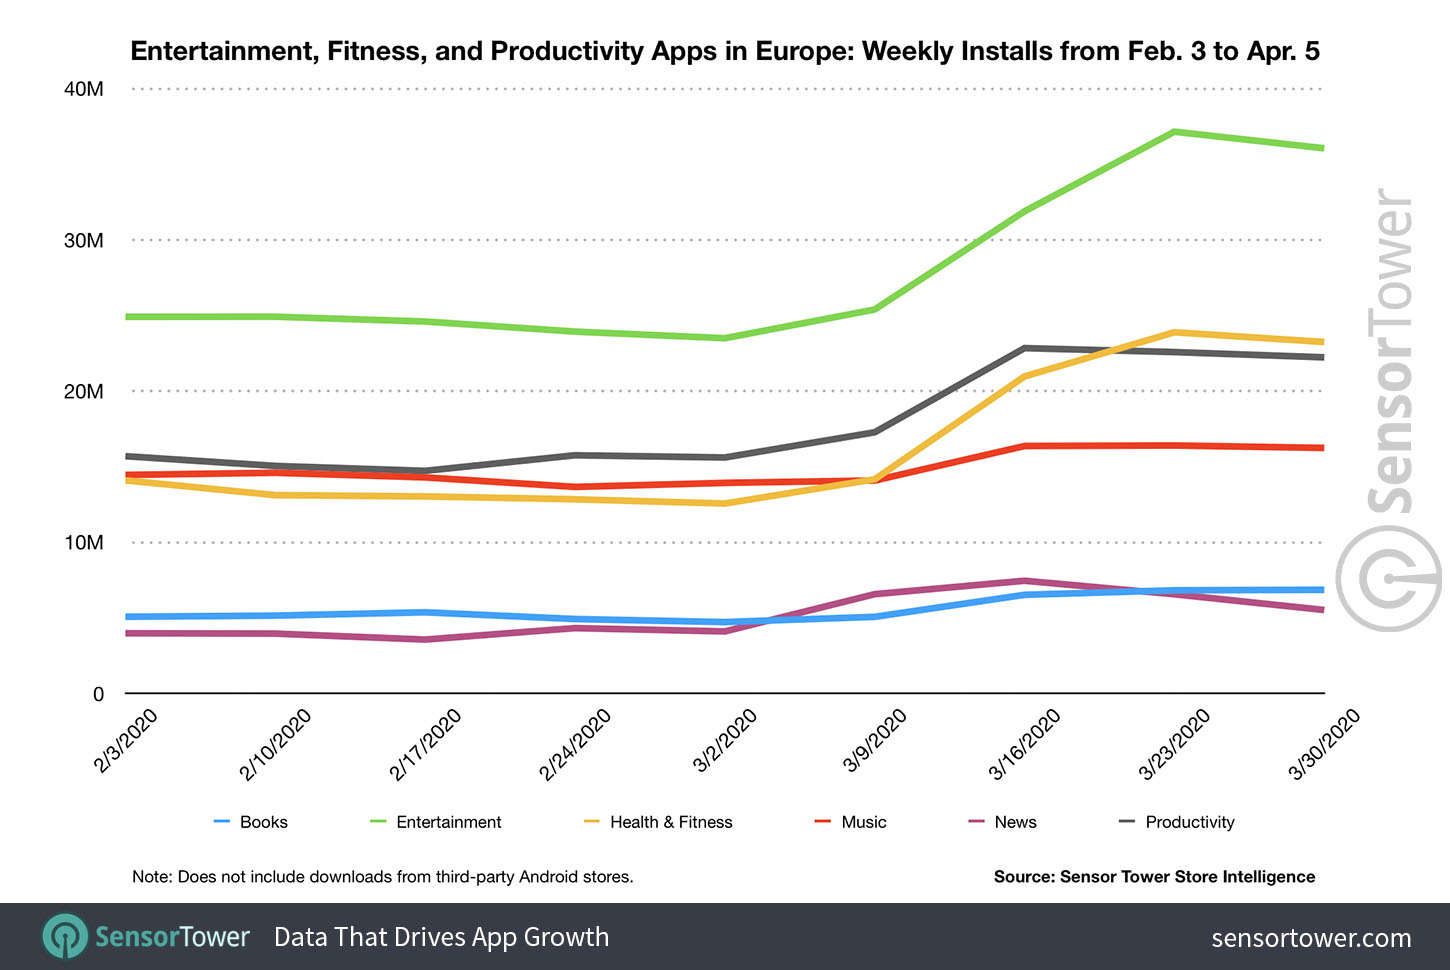 Weekly Entertainment and Productivity app category downloads in Europe from Feb 3 to April 5 2020